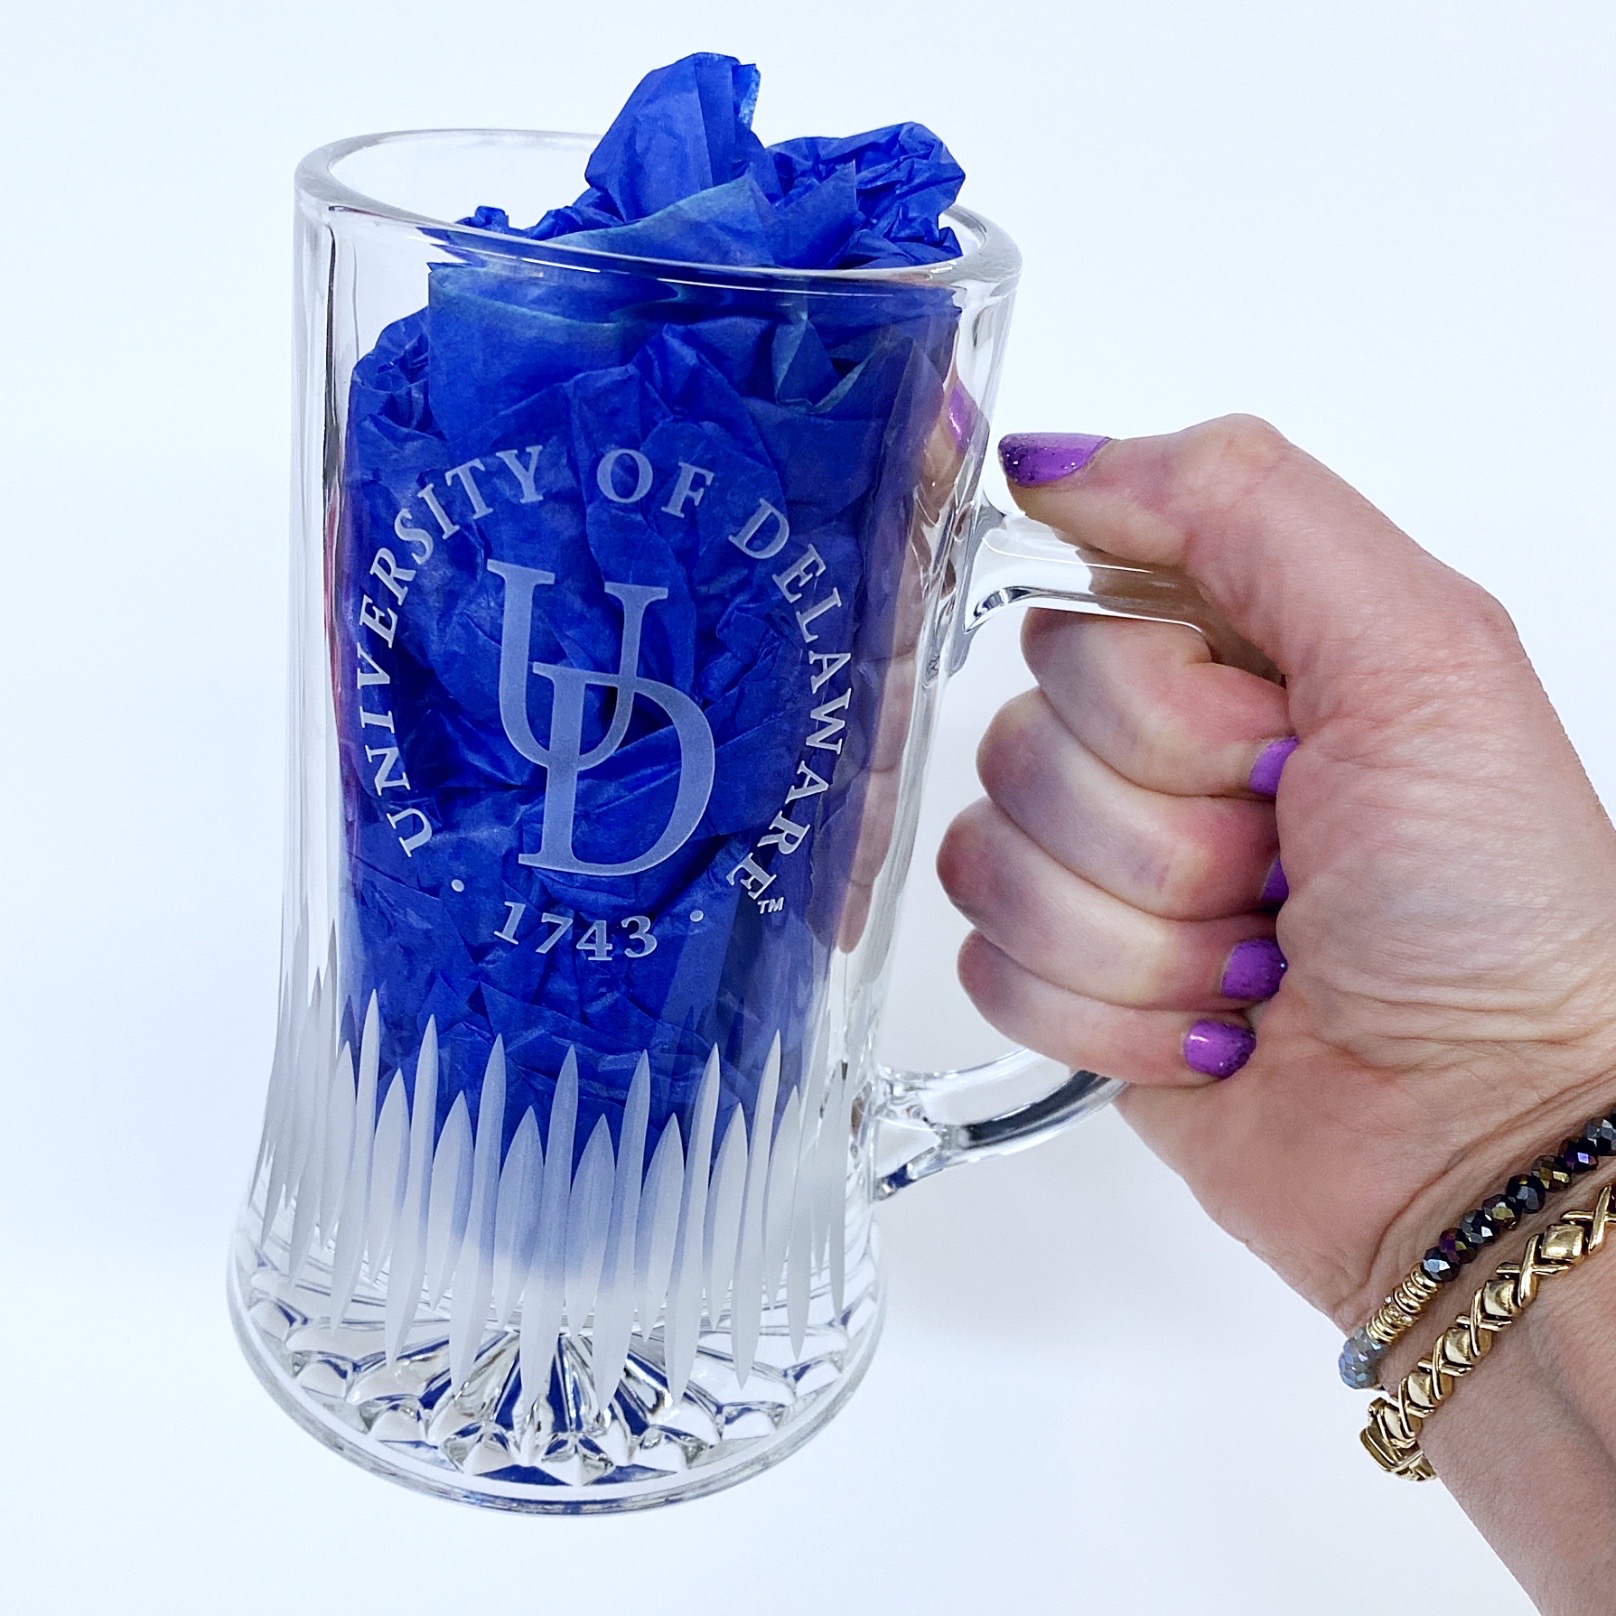 University of Delaware Color Block Can Koozie – National 5 and 10